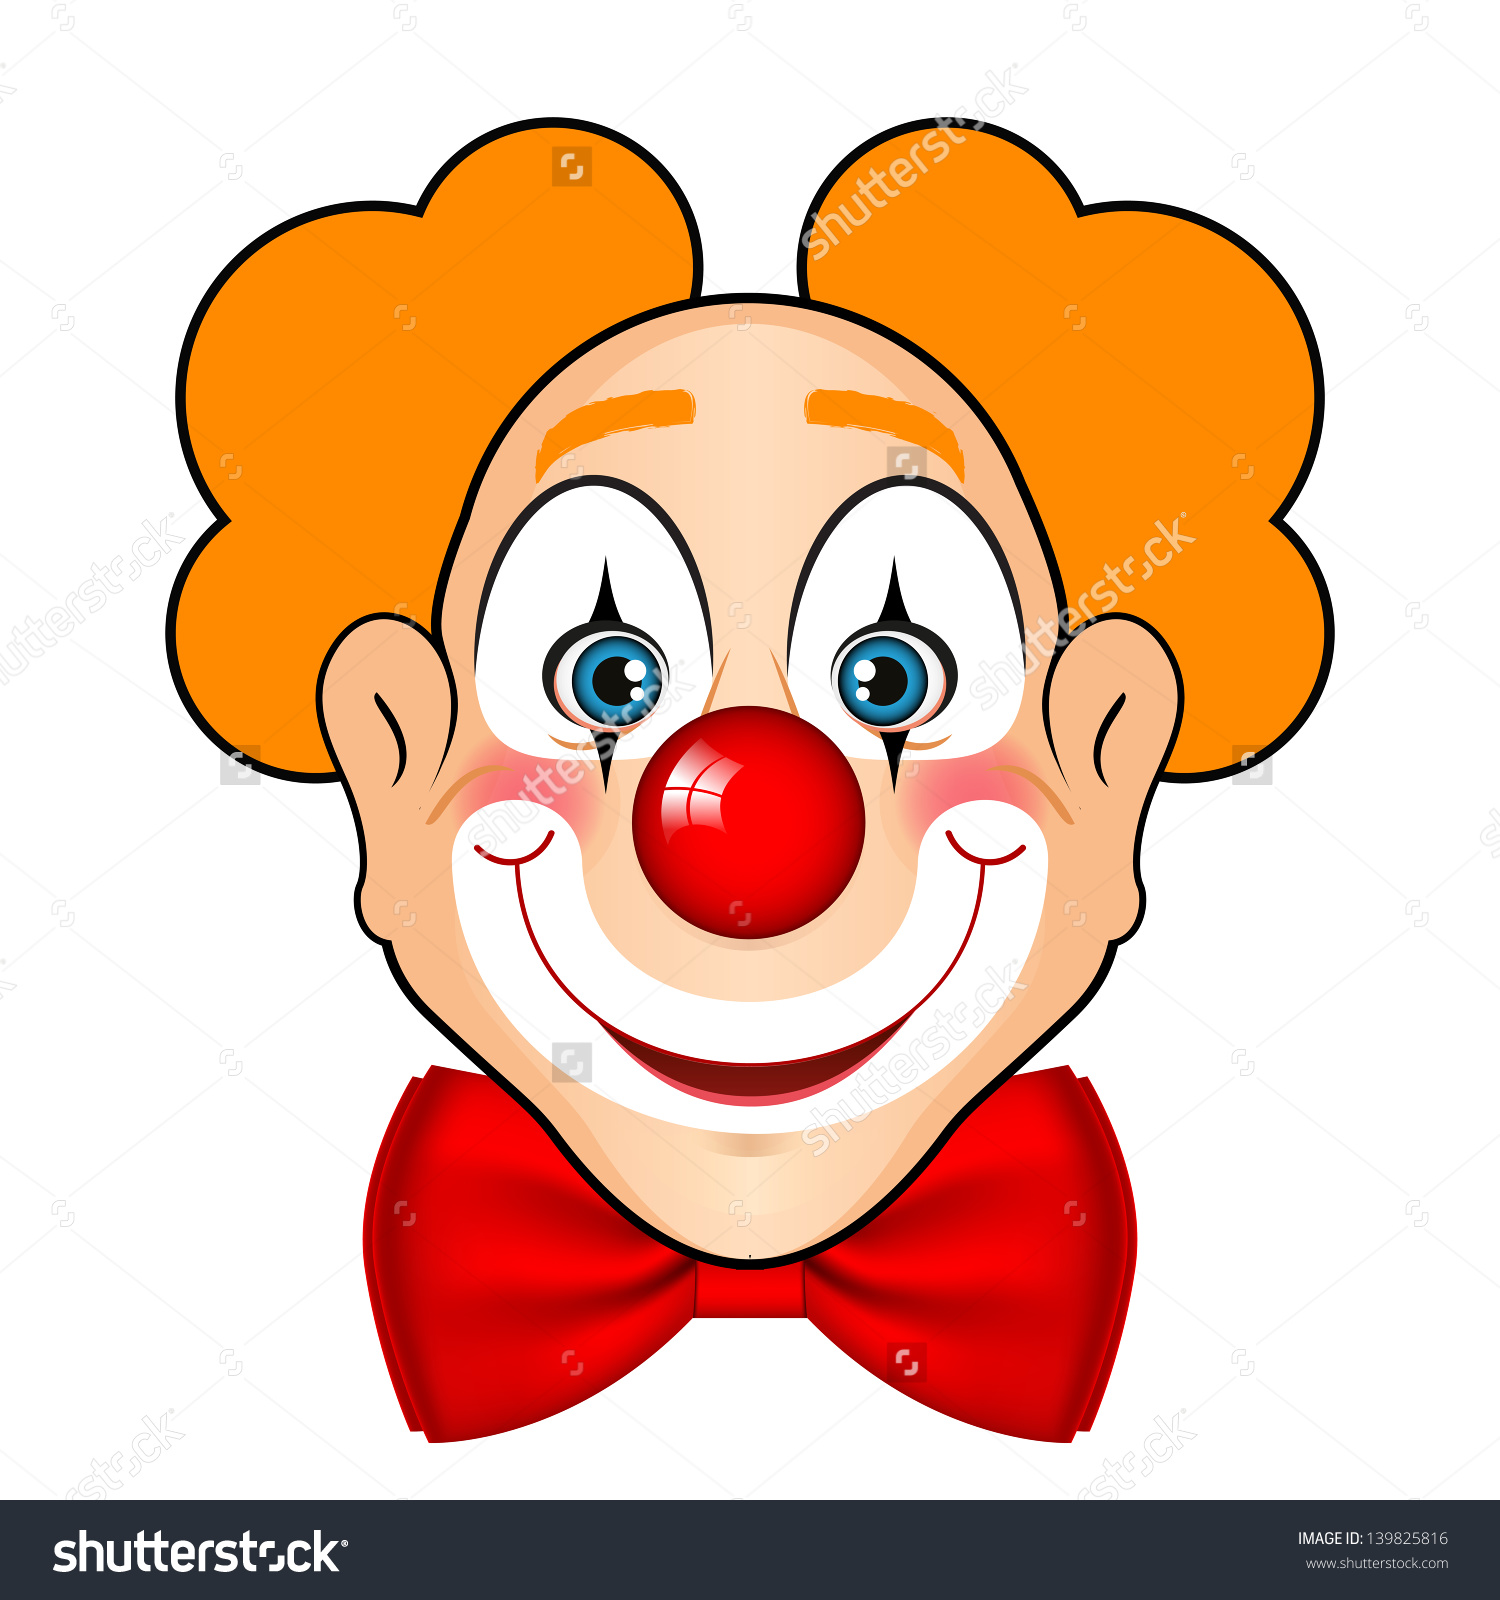 Search for Clown drawing at